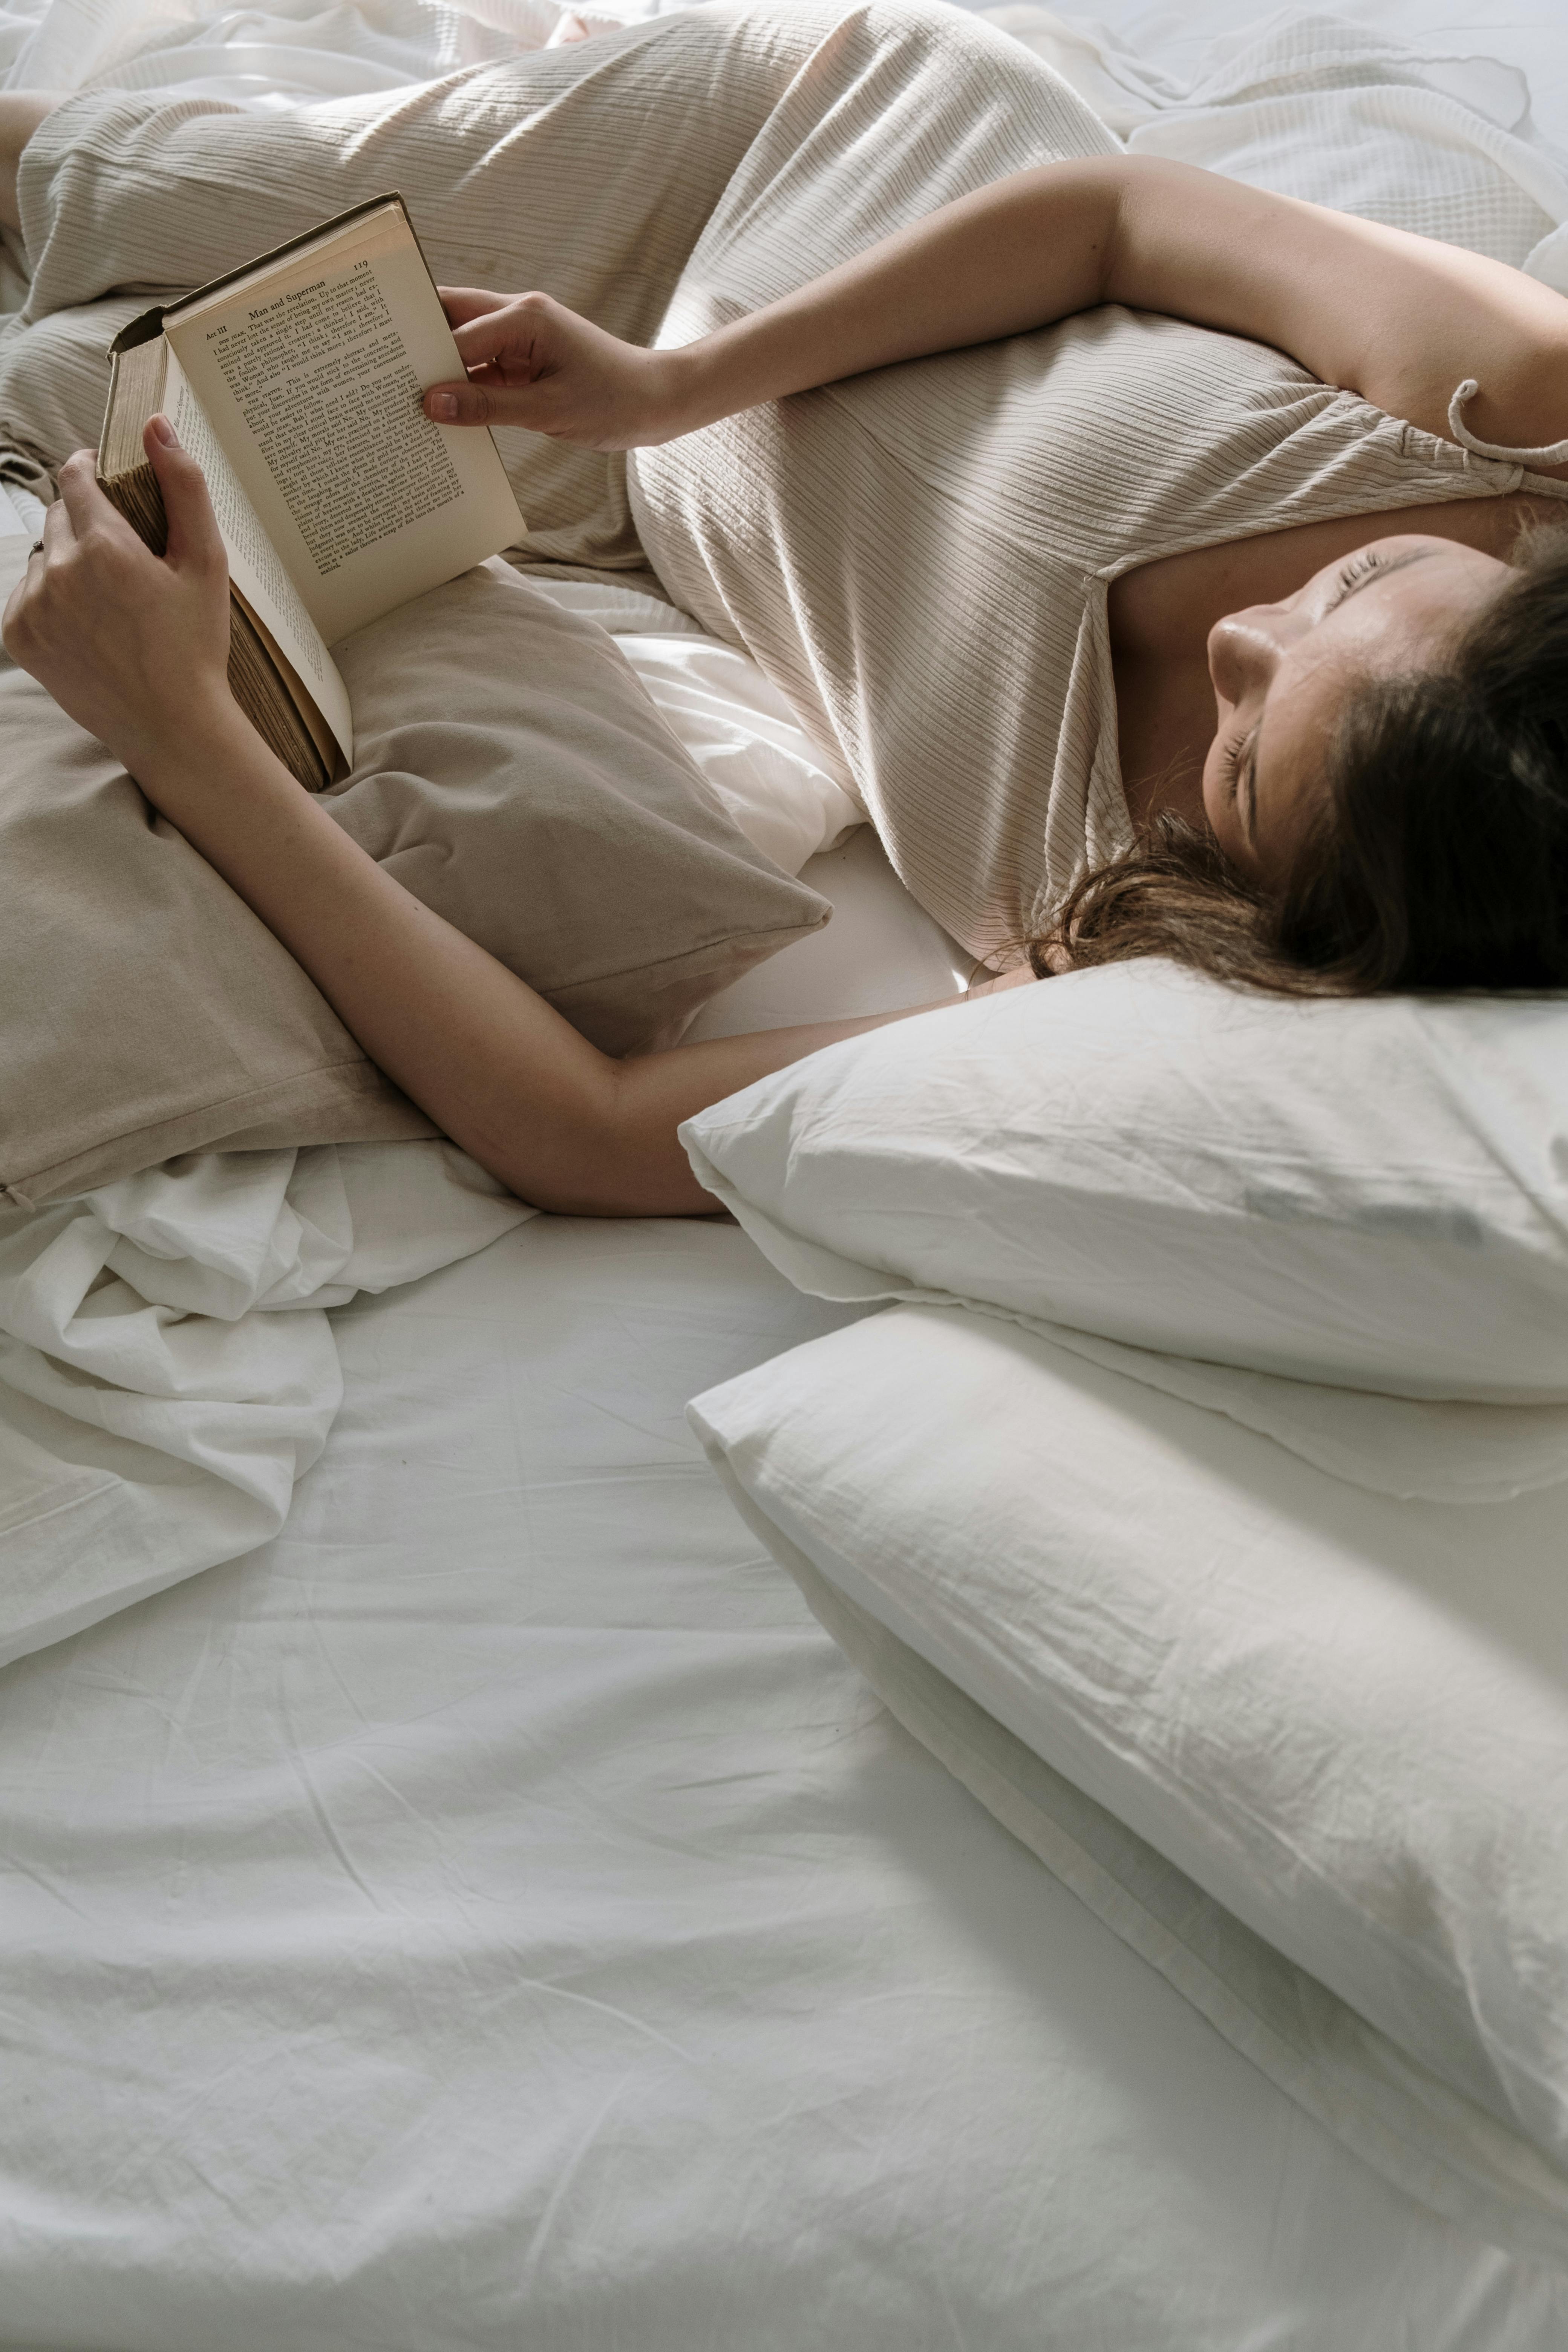 A woman lying in bed reading a book | Source: Pexels